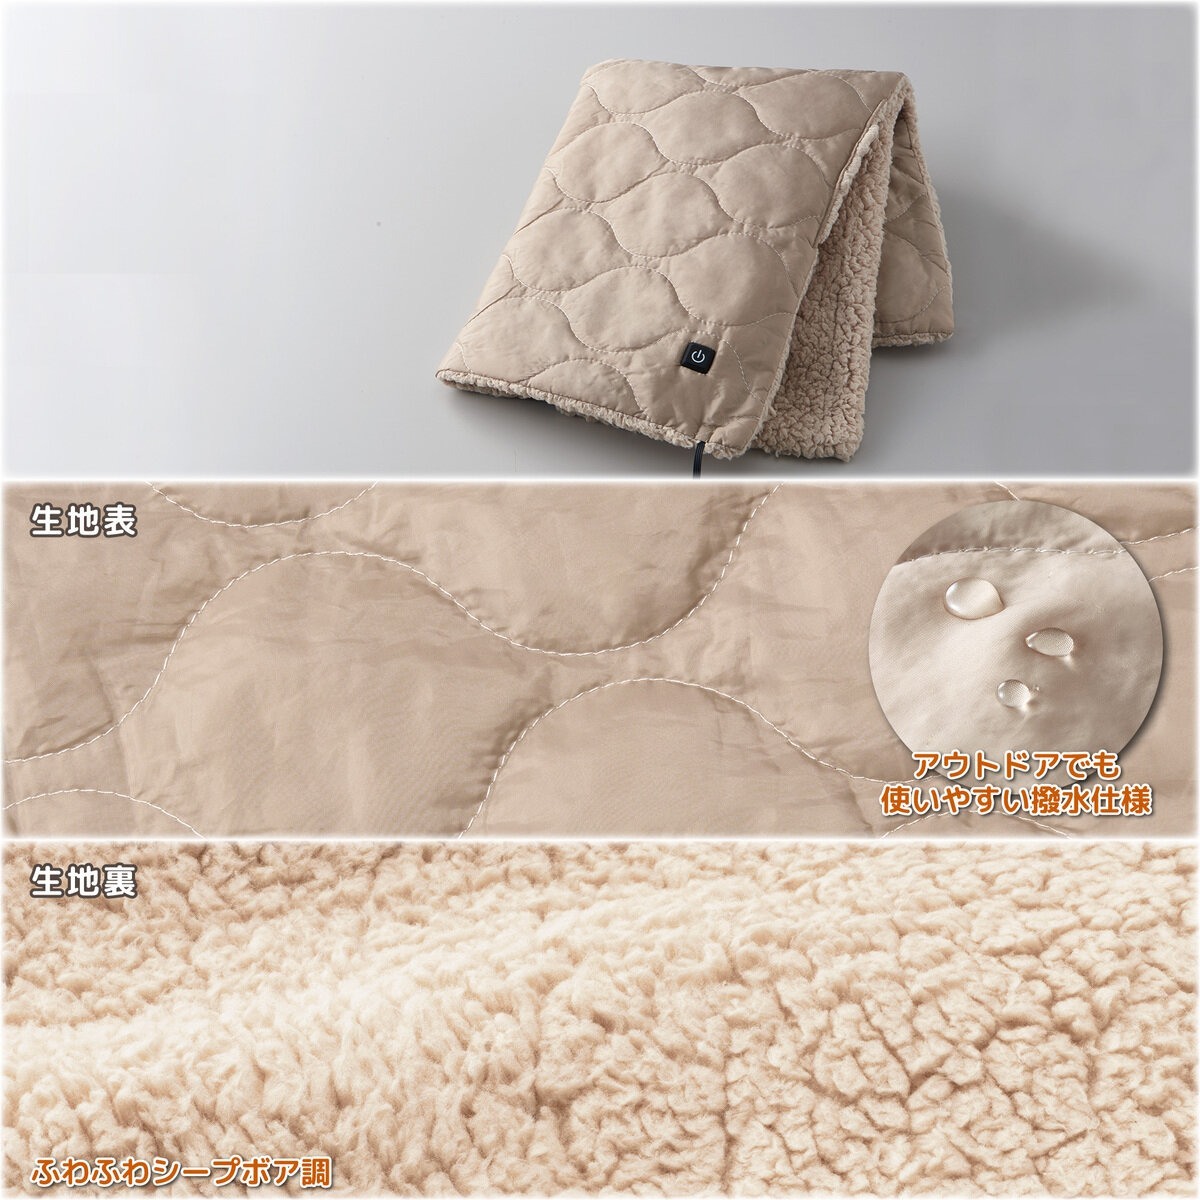  package damage Yuasa USB supply of electricity electric heating heater attaching portable electric blanket YCB-CU25C beige 90cm×60cm lap blanket 